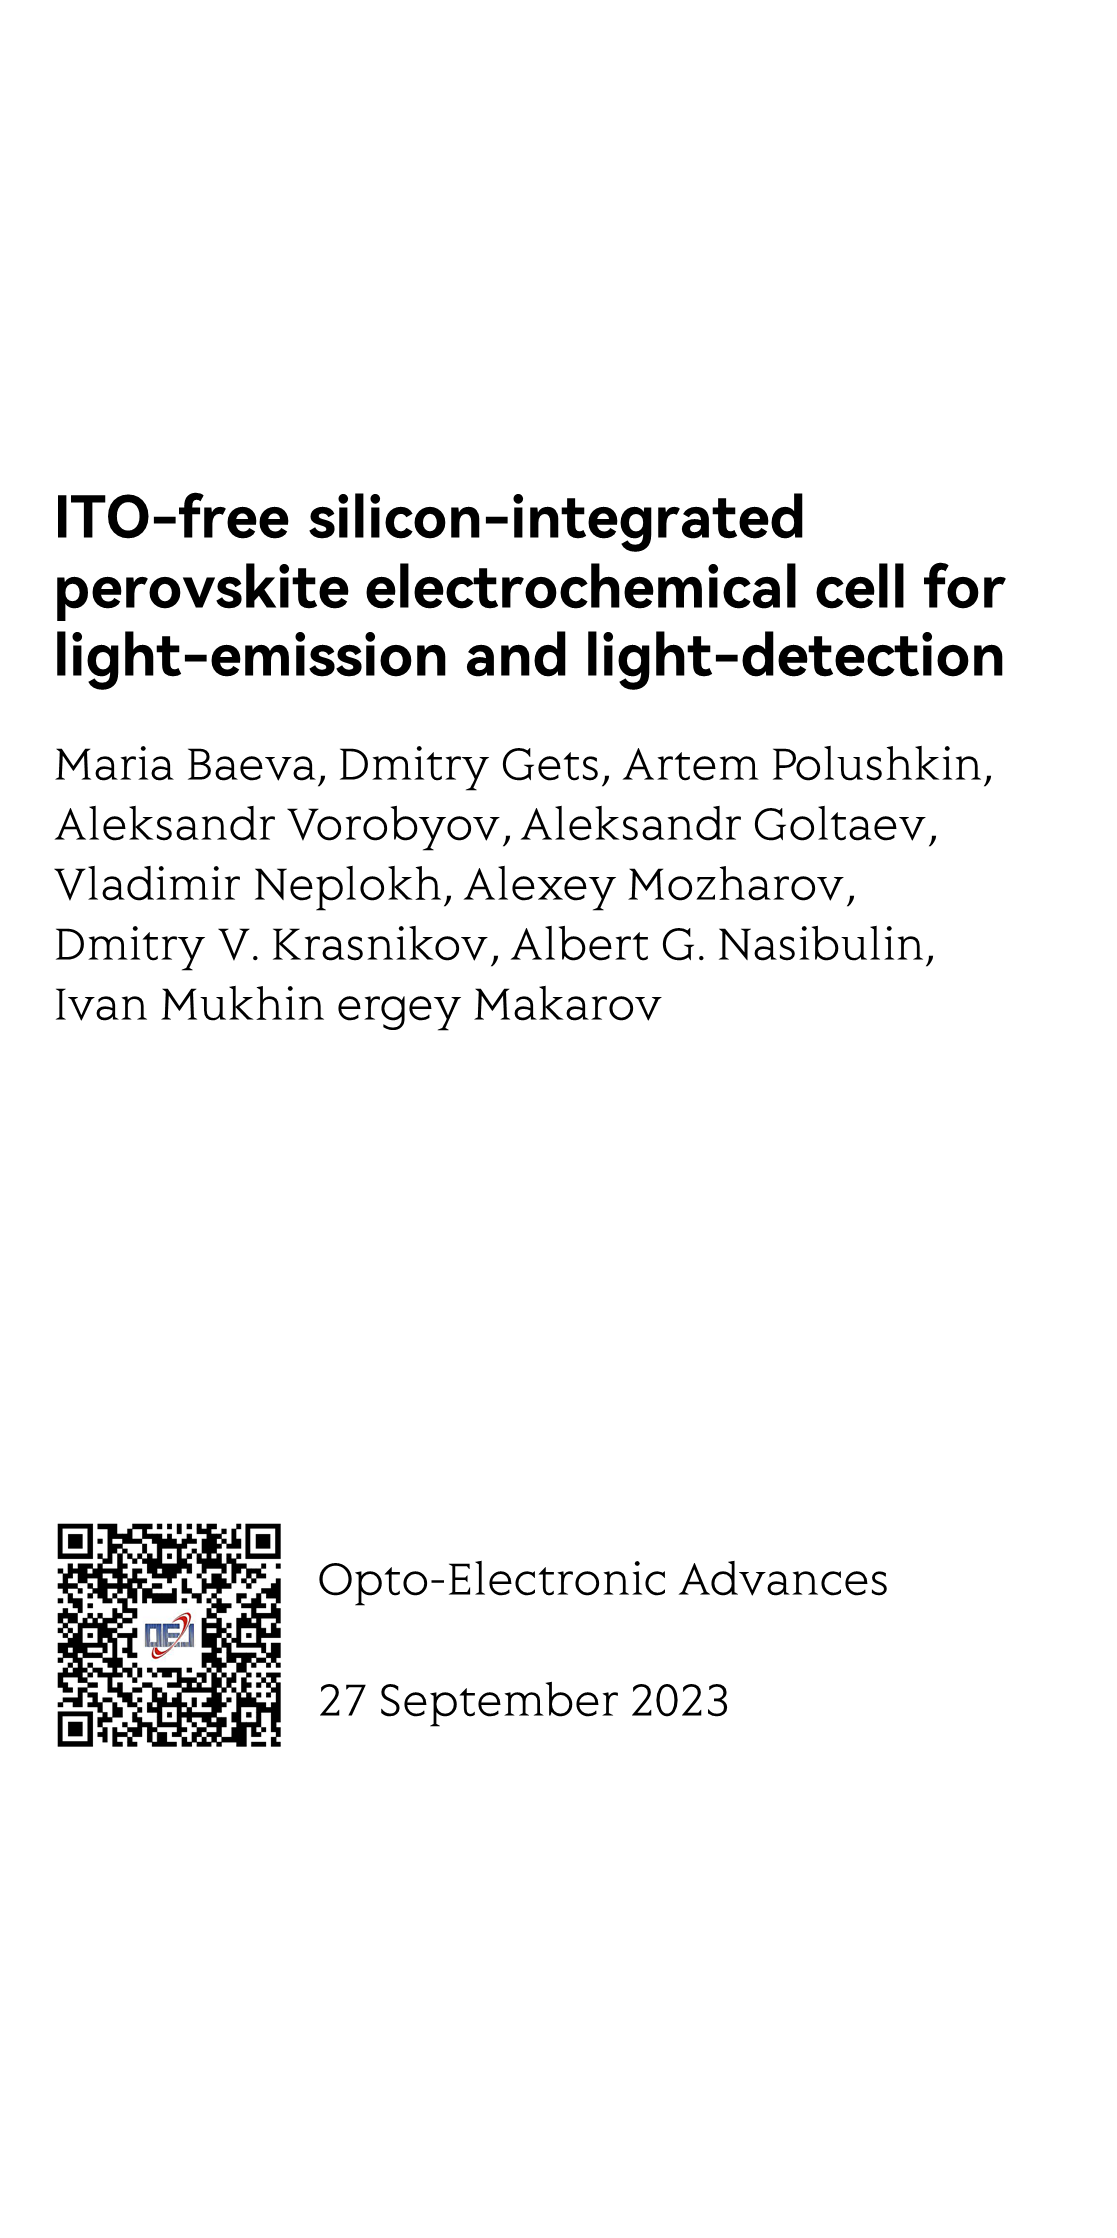 ITO-free silicon-integrated perovskite electrochemical cell for light-emission and light-detection_1